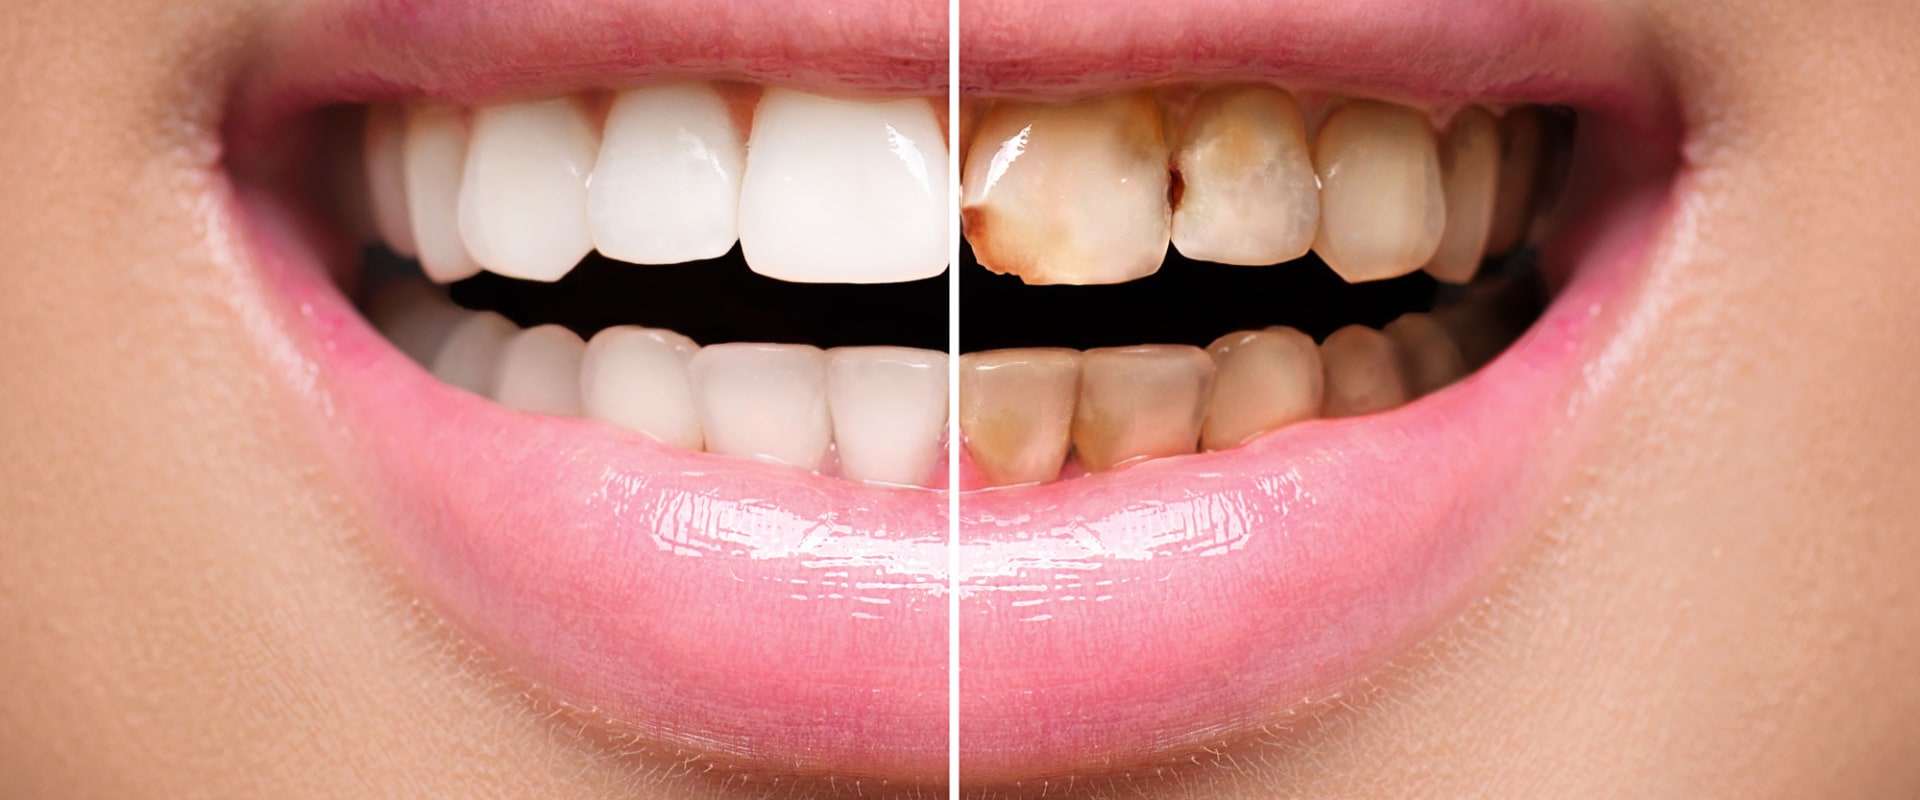 Do you still have feeling in your teeth with veneers?